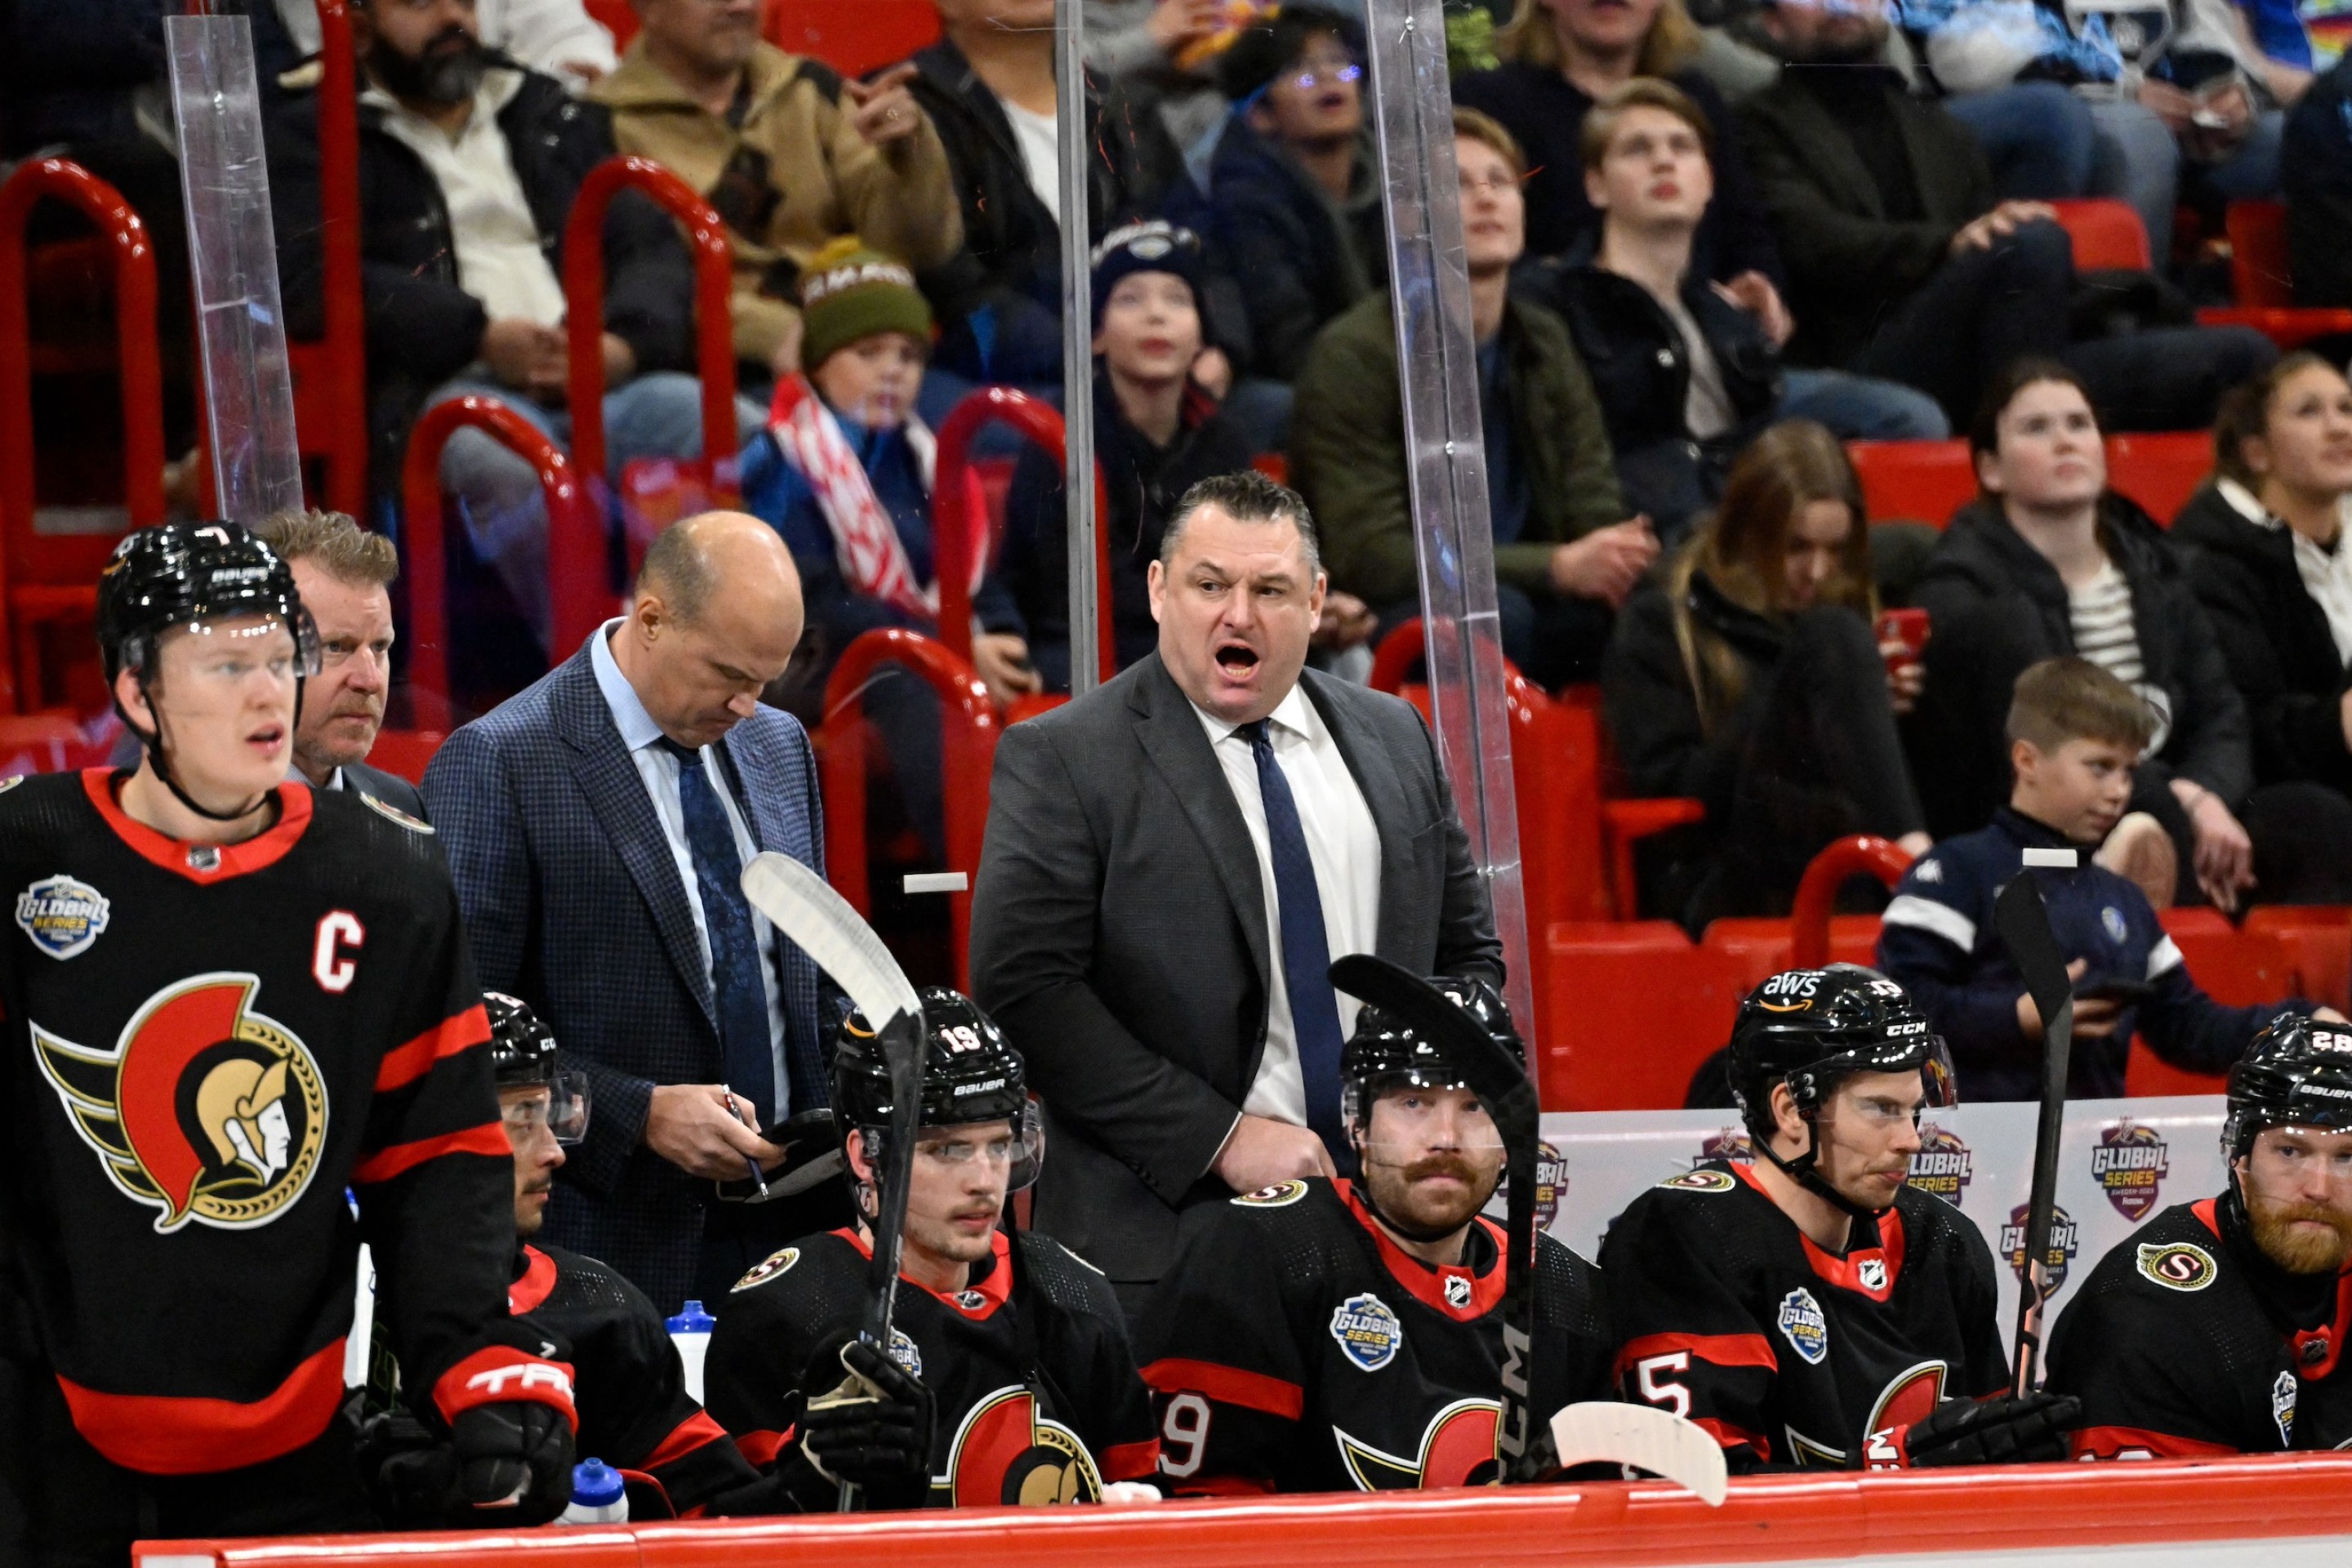 Ottawa Senators head coach D.J. Smith (back R) reacts during the NHL Global Series Ice Hockey match between Detroit Red Wings and Ottawa Senators in Stockholm on November 16, 2023. (Photo by Henrik MONTGOMERY / TT NEWS AGENCY / AFP) / Sweden OUT (Photo by HENRIK MONTGOMERY/TT NEWS AGENCY/AFP via Getty Images)